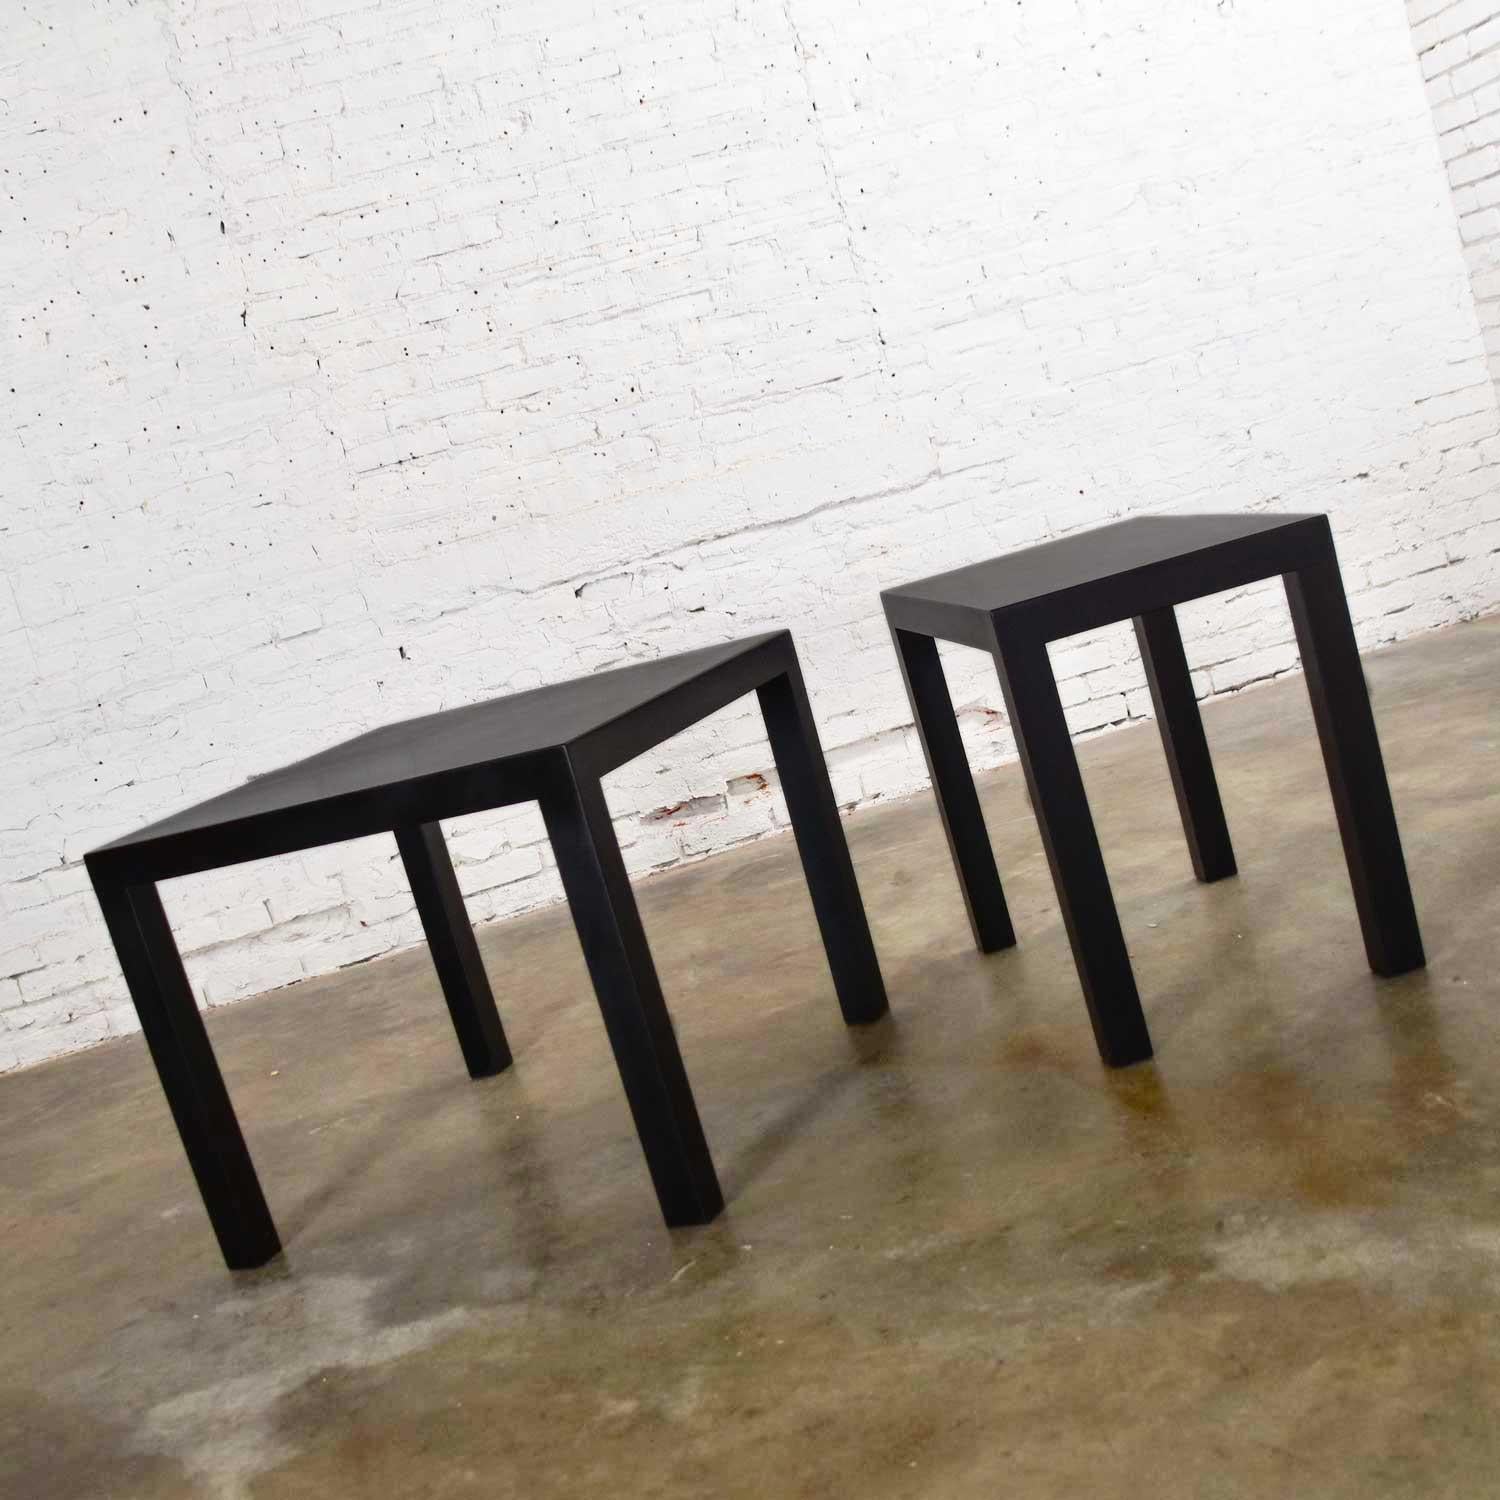 American Mid-Century Modern Black Painted Parsons Side Tables 1 Square 1 Rectangle, Pair